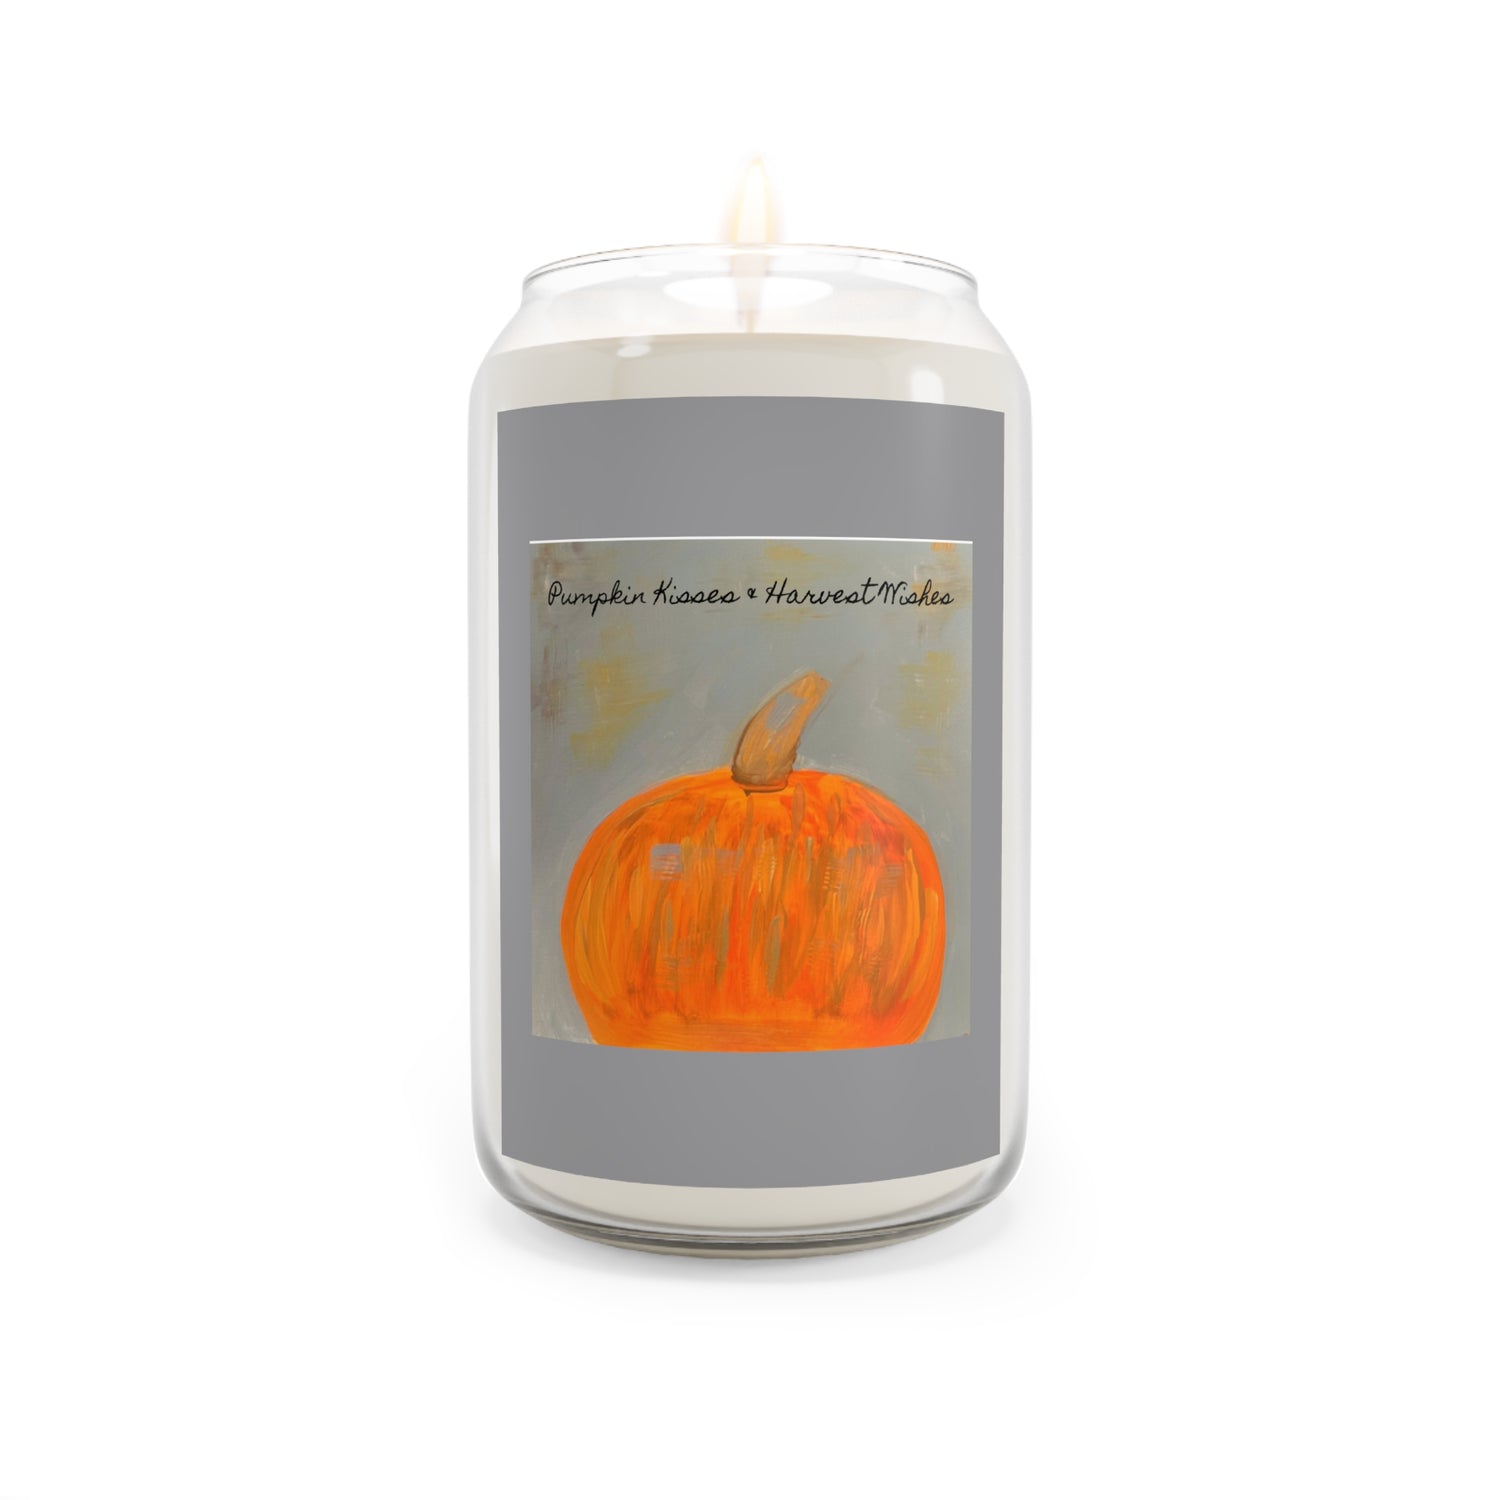 Pumpkin Kisses & Harvest Wishes Scented Candle, 13.75oz